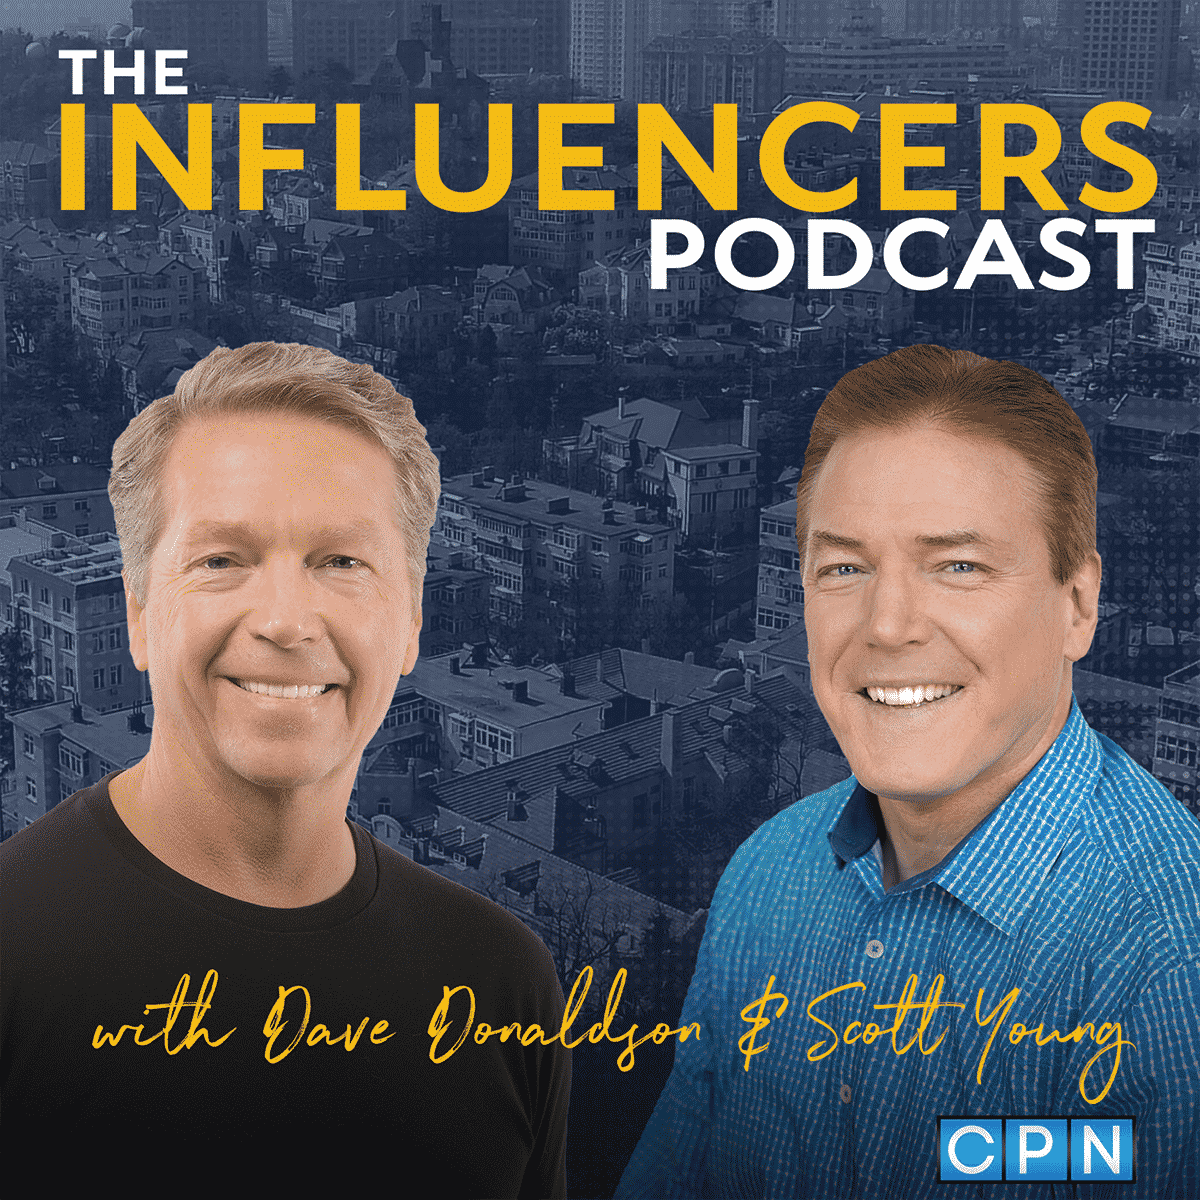 CityServe announced today it has launched season two of The Influencers Podcast,   with co-hosts Dave Donaldson and Scott Young